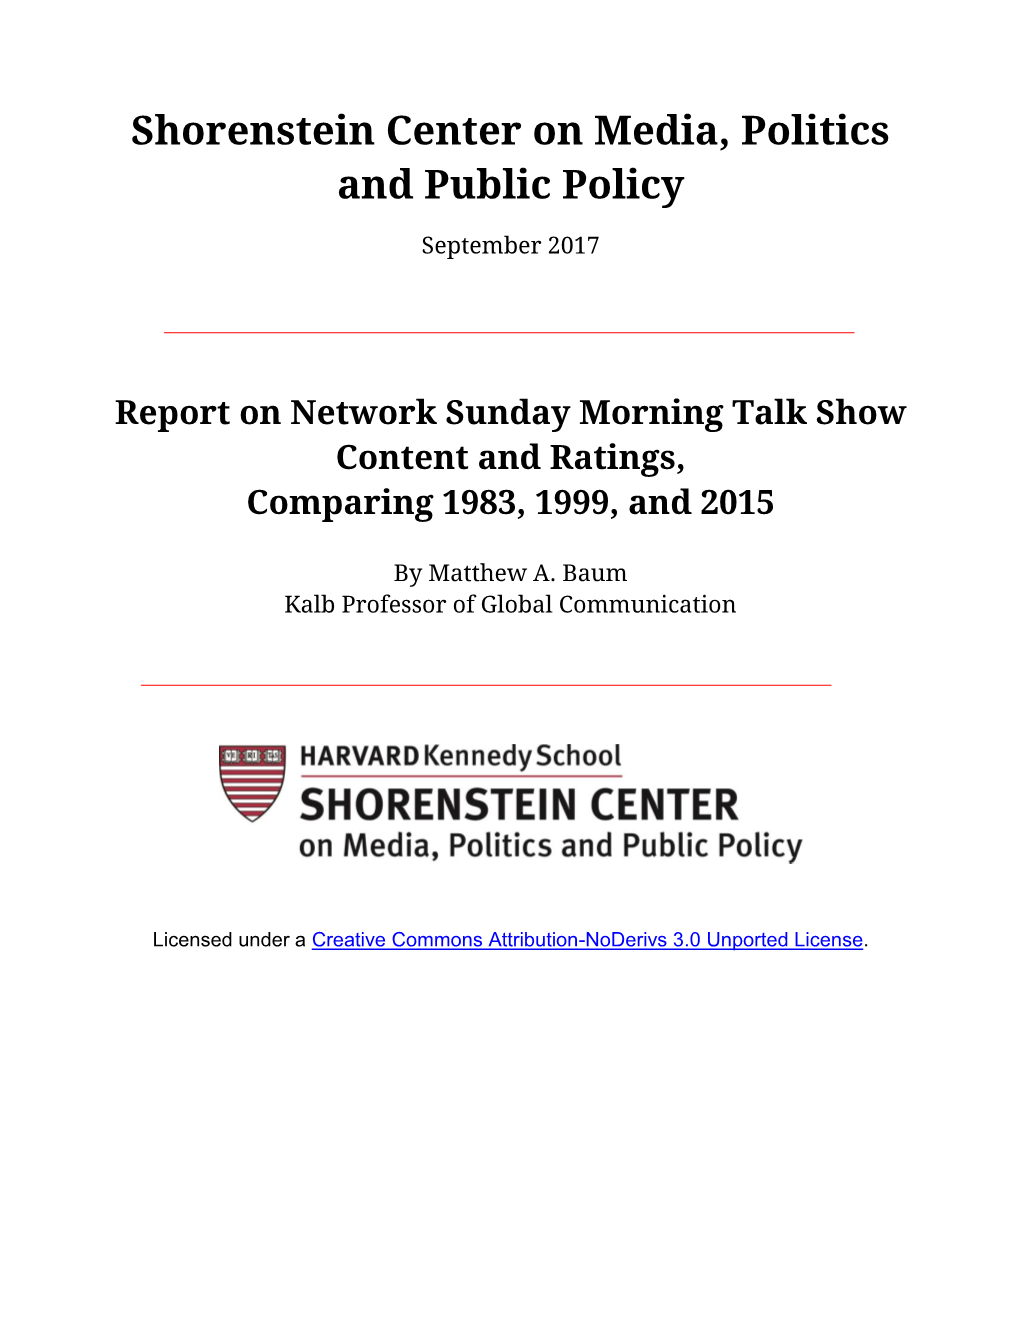 Preliminary Findings from Sunday Talk Show Study